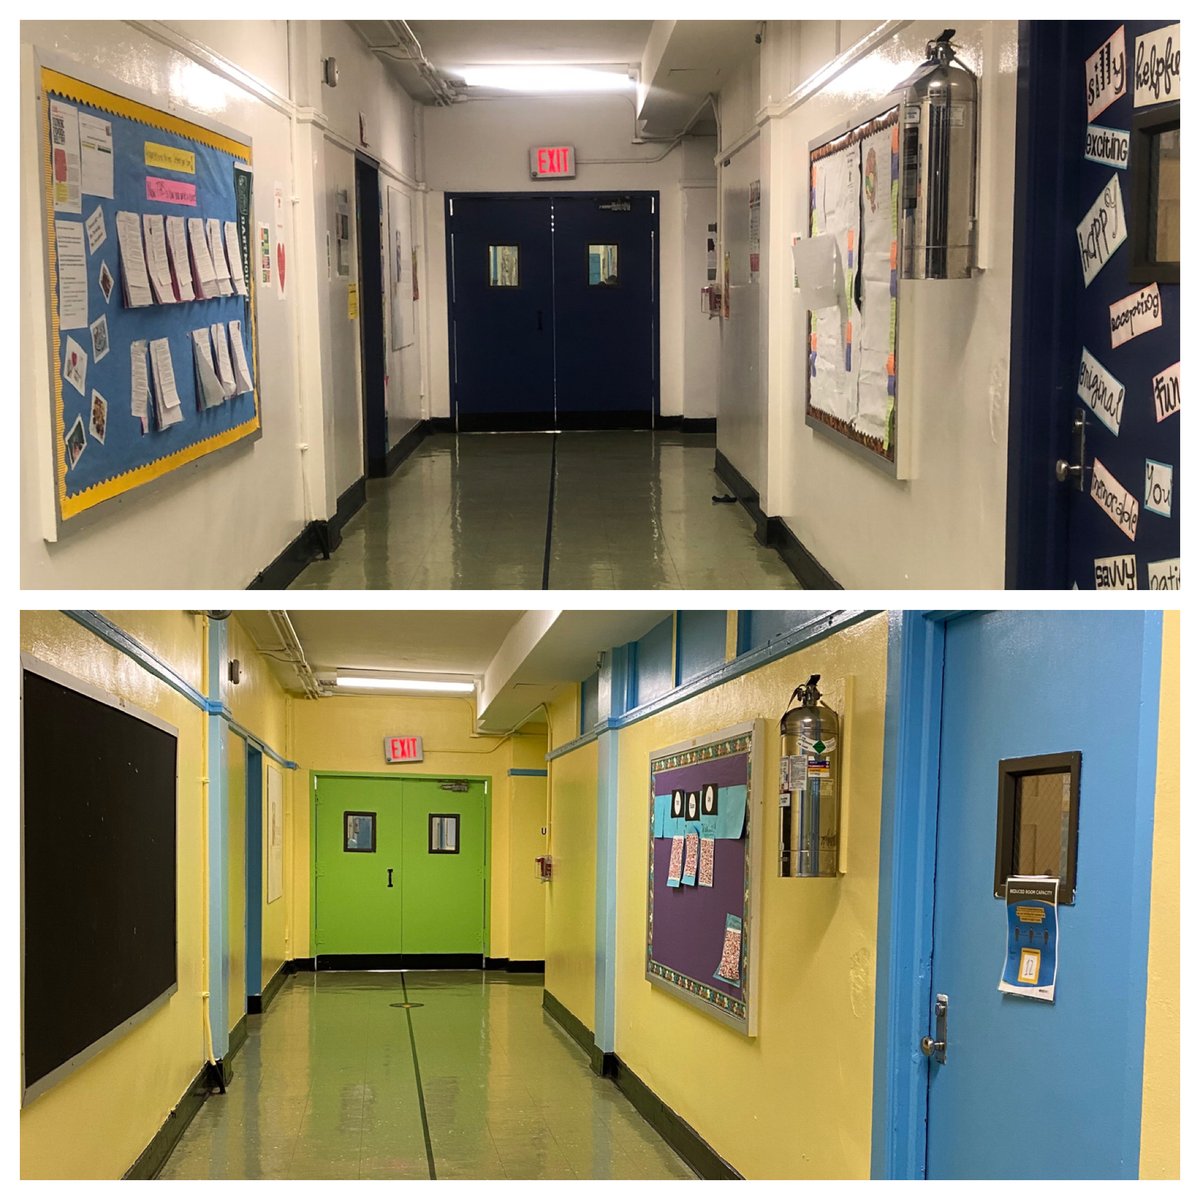 Check out this beautiful before and after of our spring Paint Club sites, Frederick Douglass Academy V. We're so thankful we were finally able to safely finish the transformation! https://t.co/7CtegdLuHz